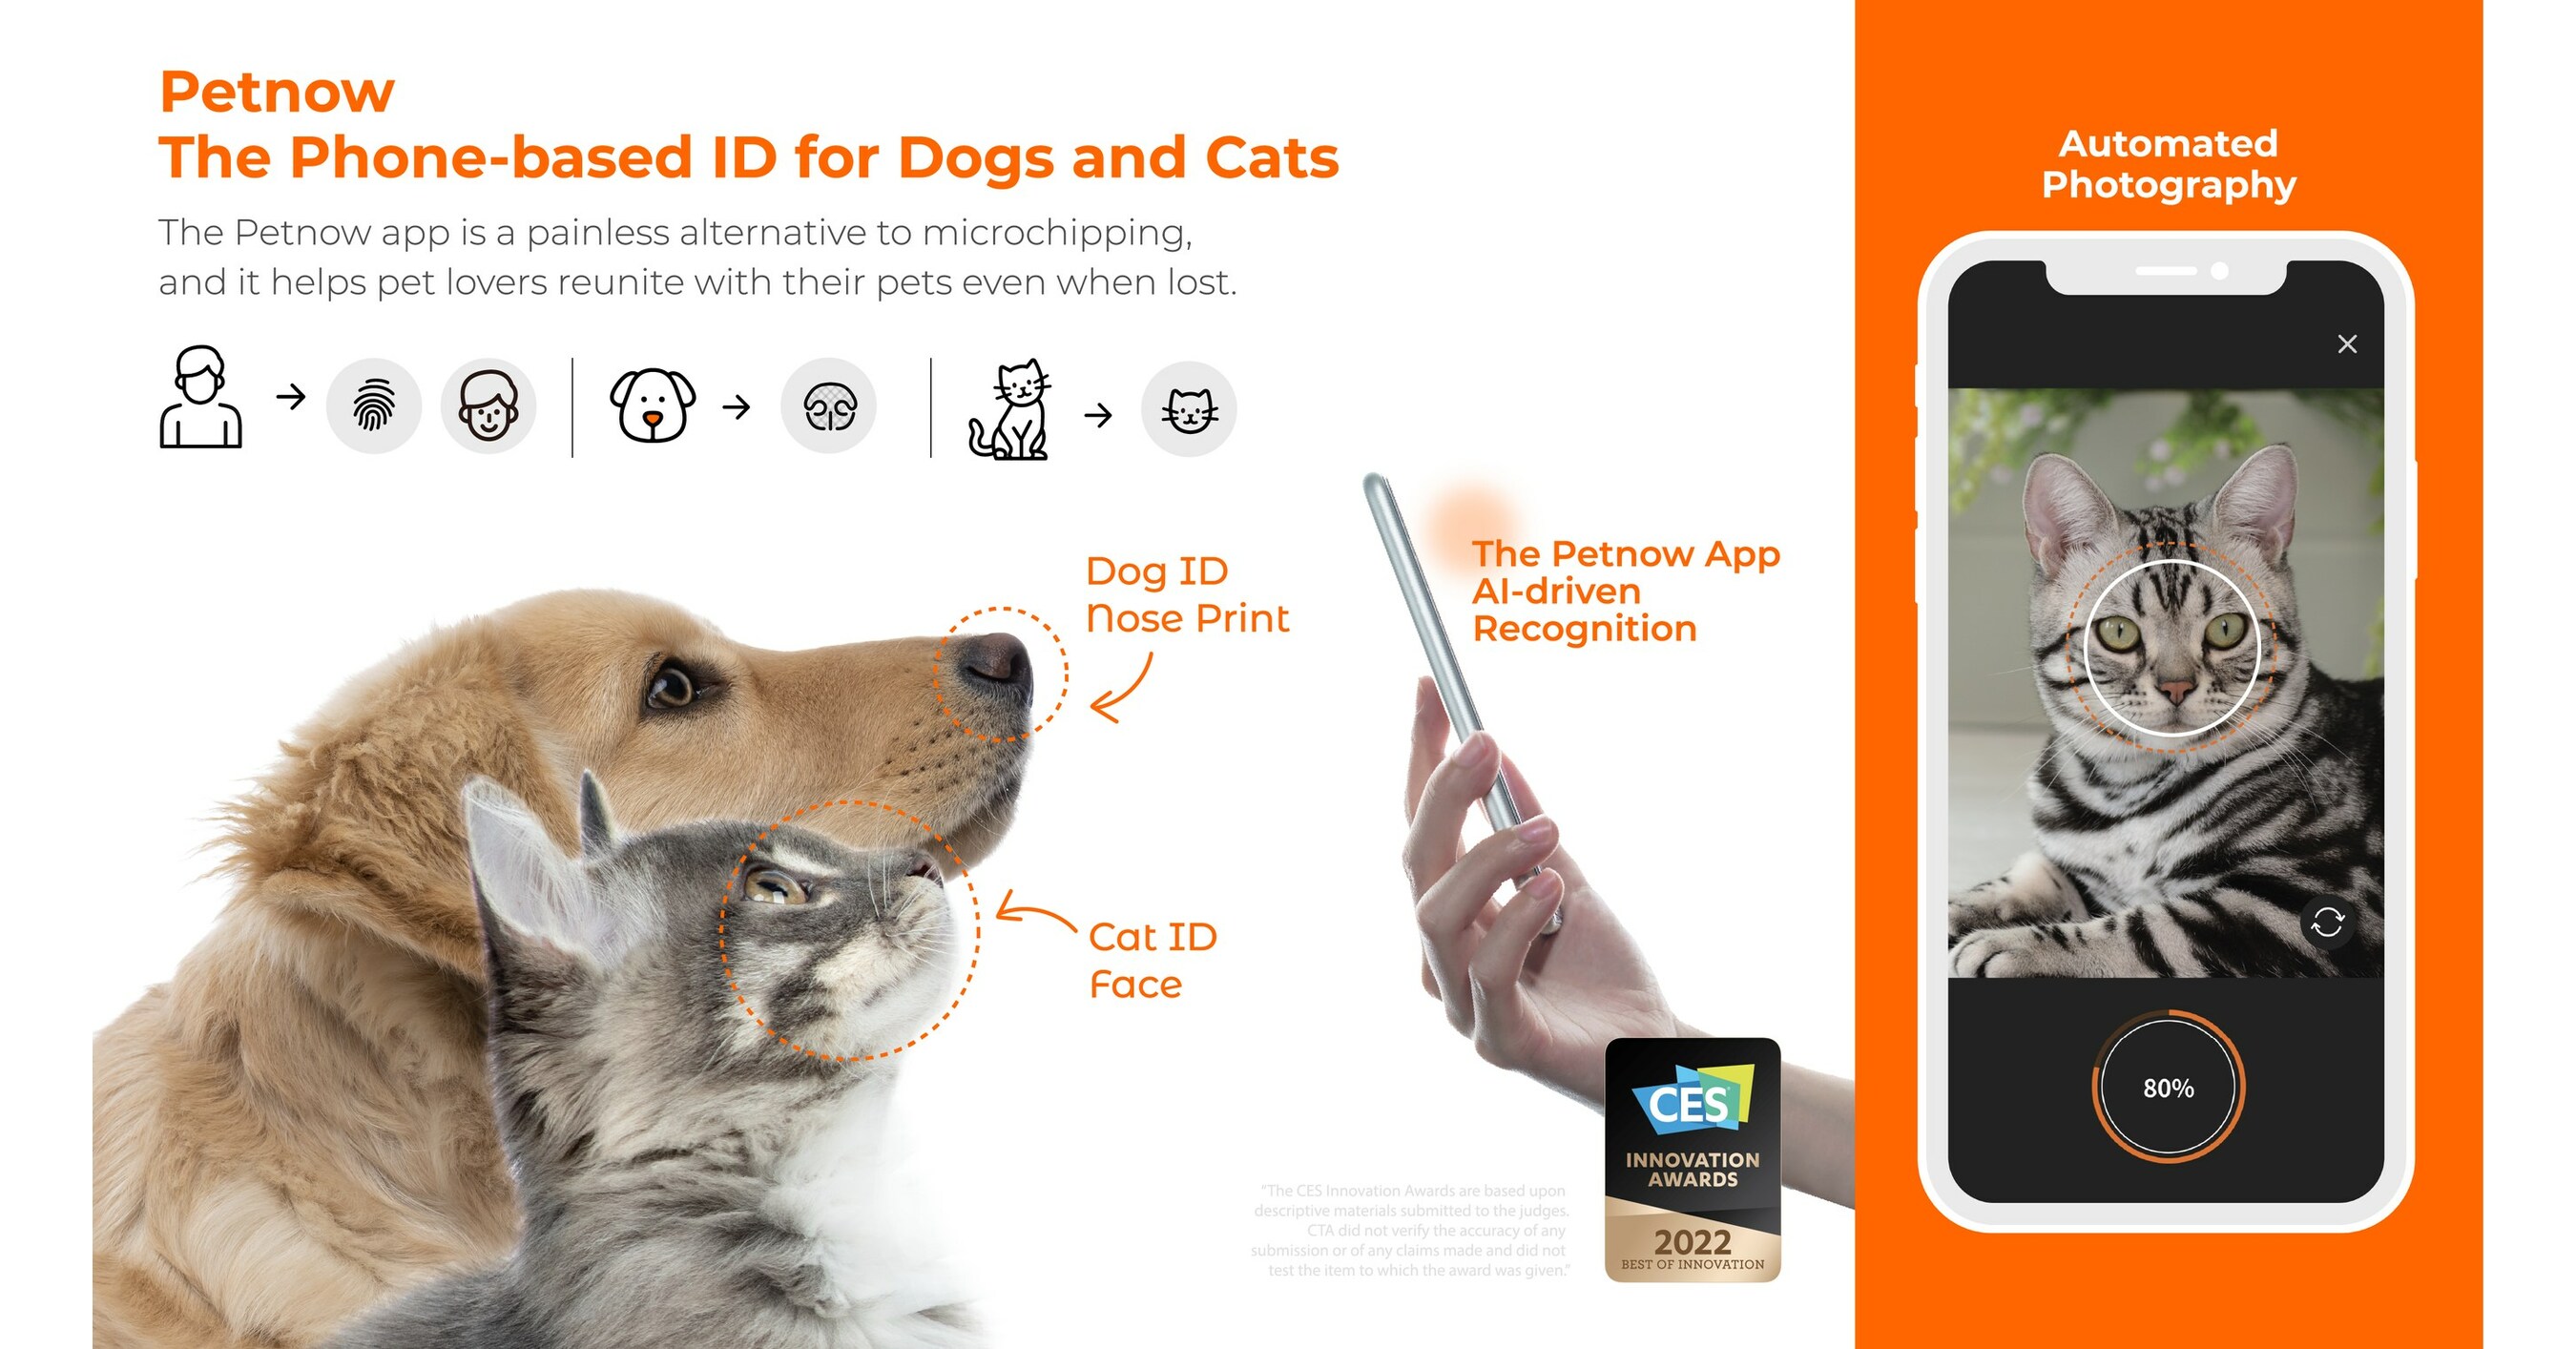 Introducing Pet Tag, a new accessory that helps reunite lost pets